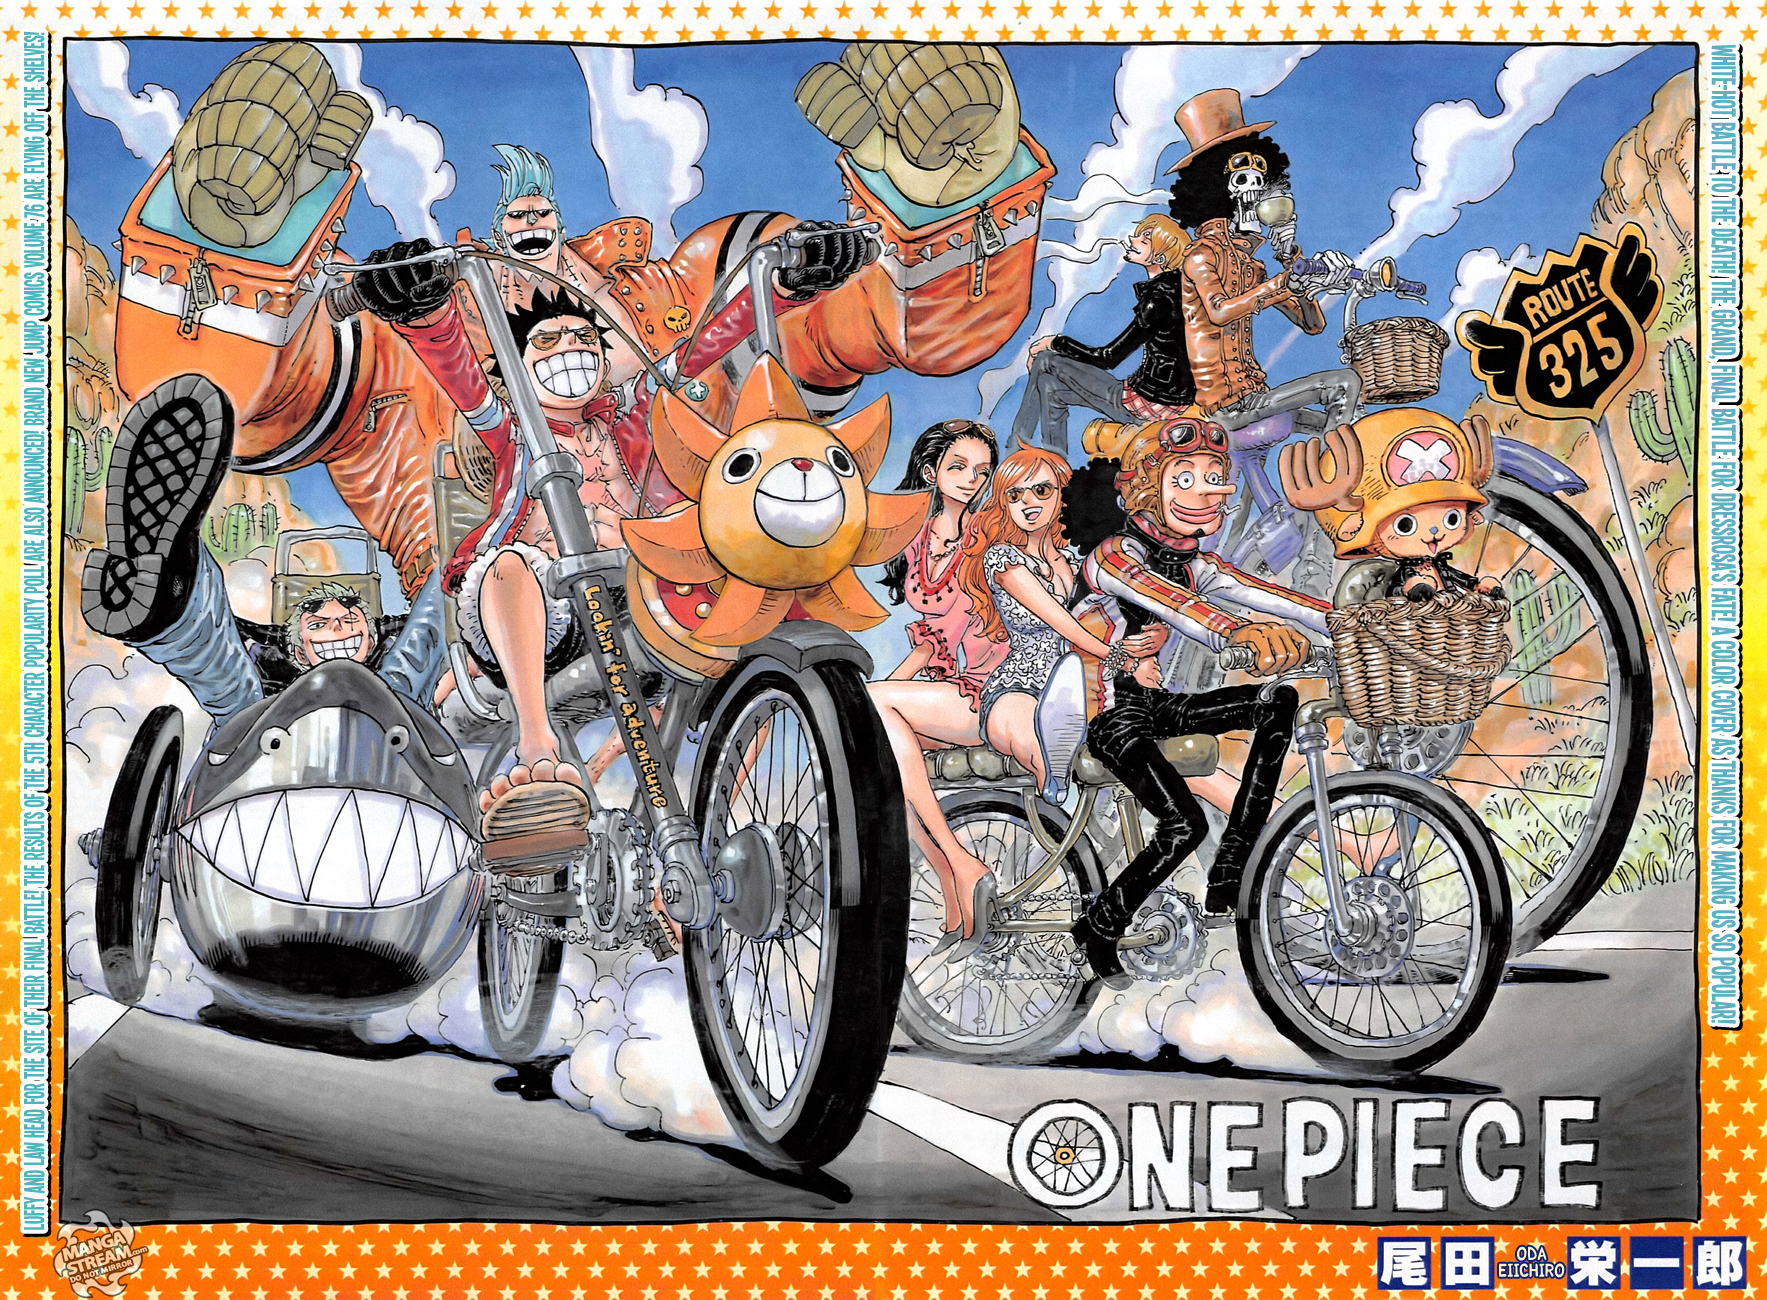 One Piece Illustration Error Spotted by Fans haruhichan.com one piece chapter 775 cover spread